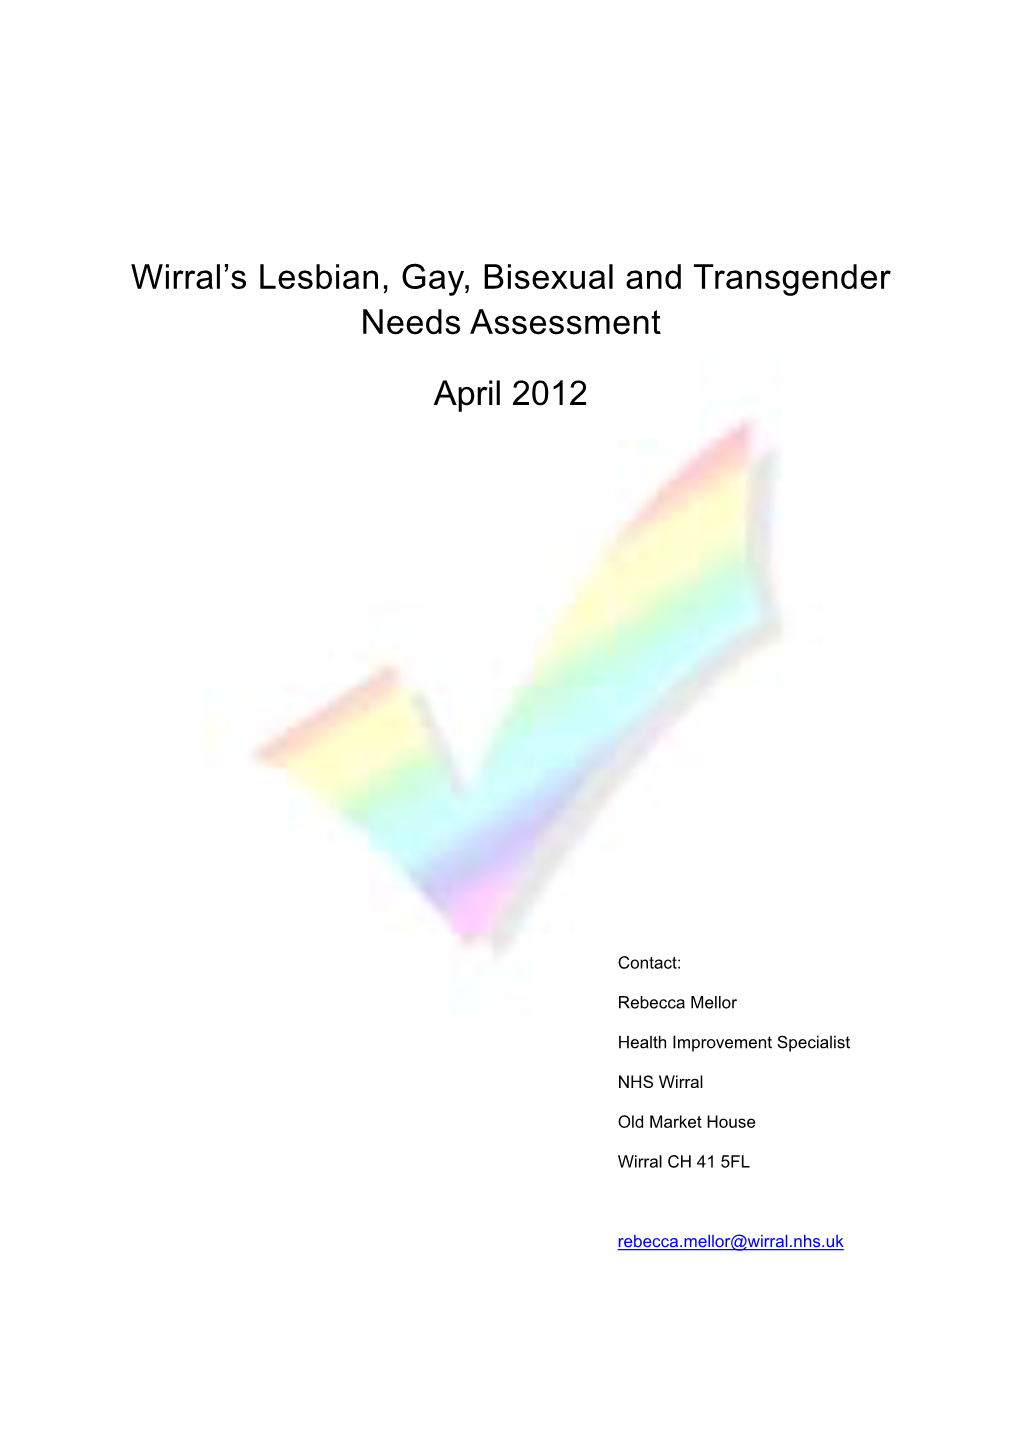 Wirral's Lesbian, Gay, Bisexual and Transgender Needs Assessment